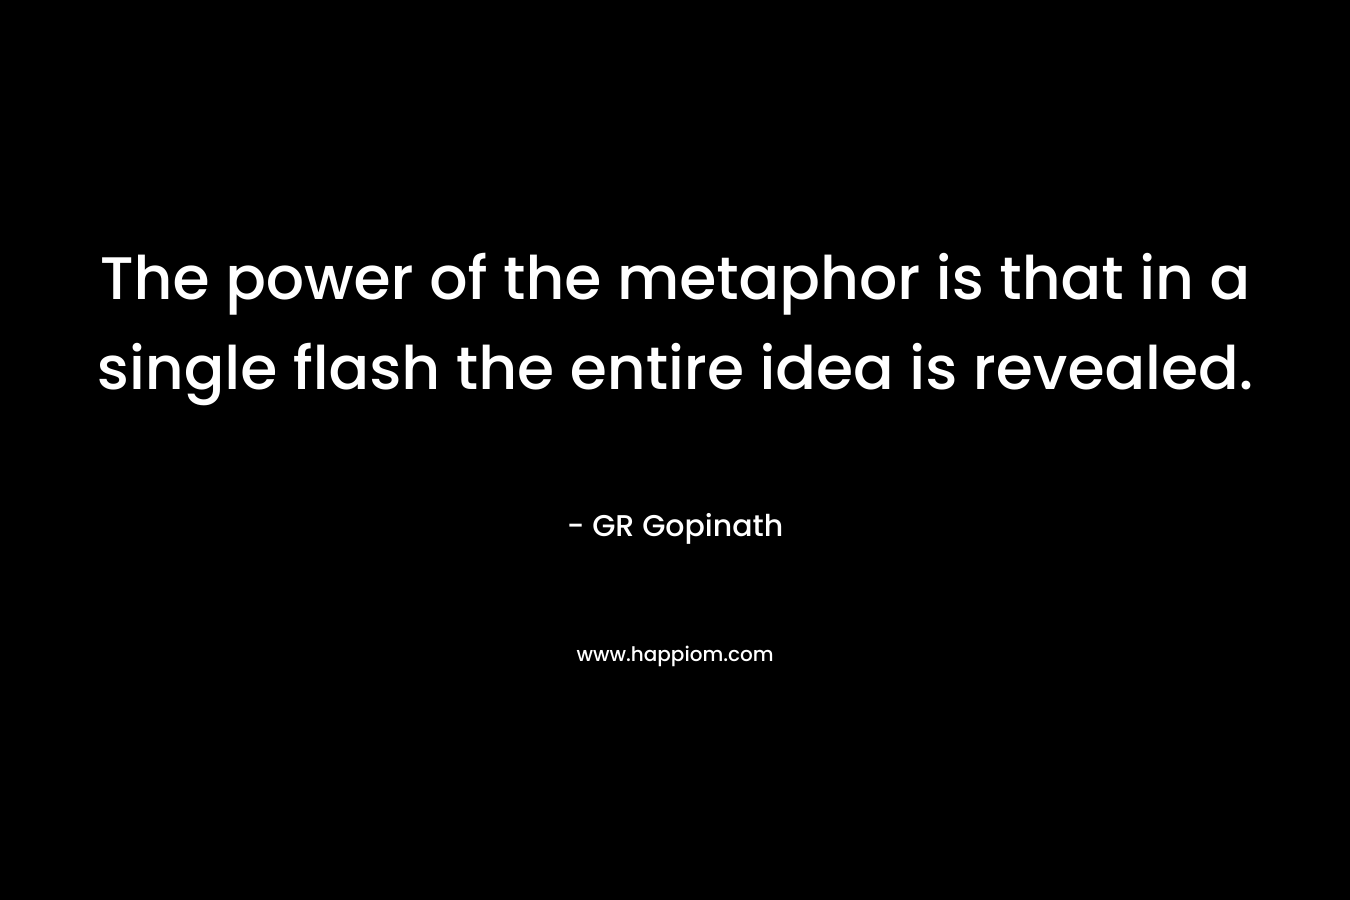 The power of the metaphor is that in a single flash the entire idea is revealed. – GR Gopinath